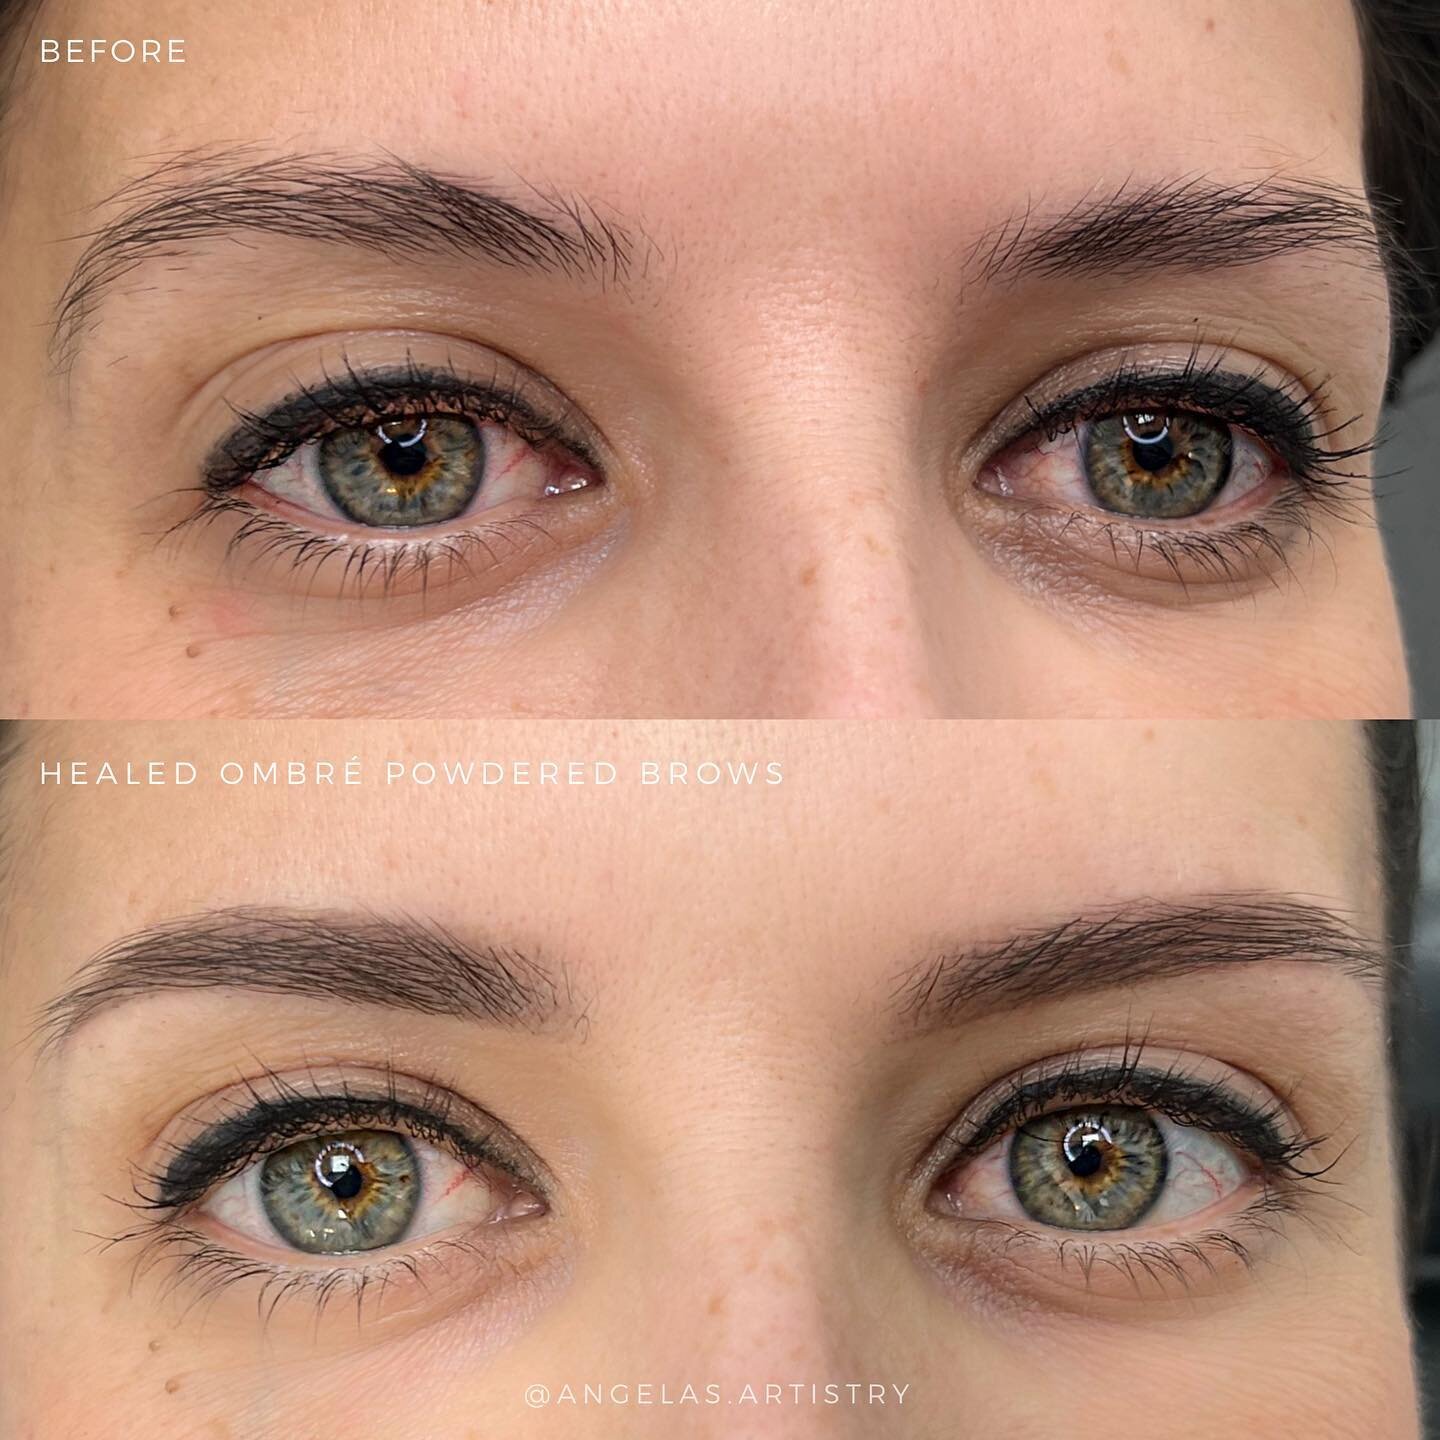 This is HEALED ombr&eacute; powdered brows just after 1 session. We enhanced her existing shape by defining and filling them in. Love how it lifted her brows, subtle changes can make a big difference. No one has to know your eyebrows are tattooed 😊
